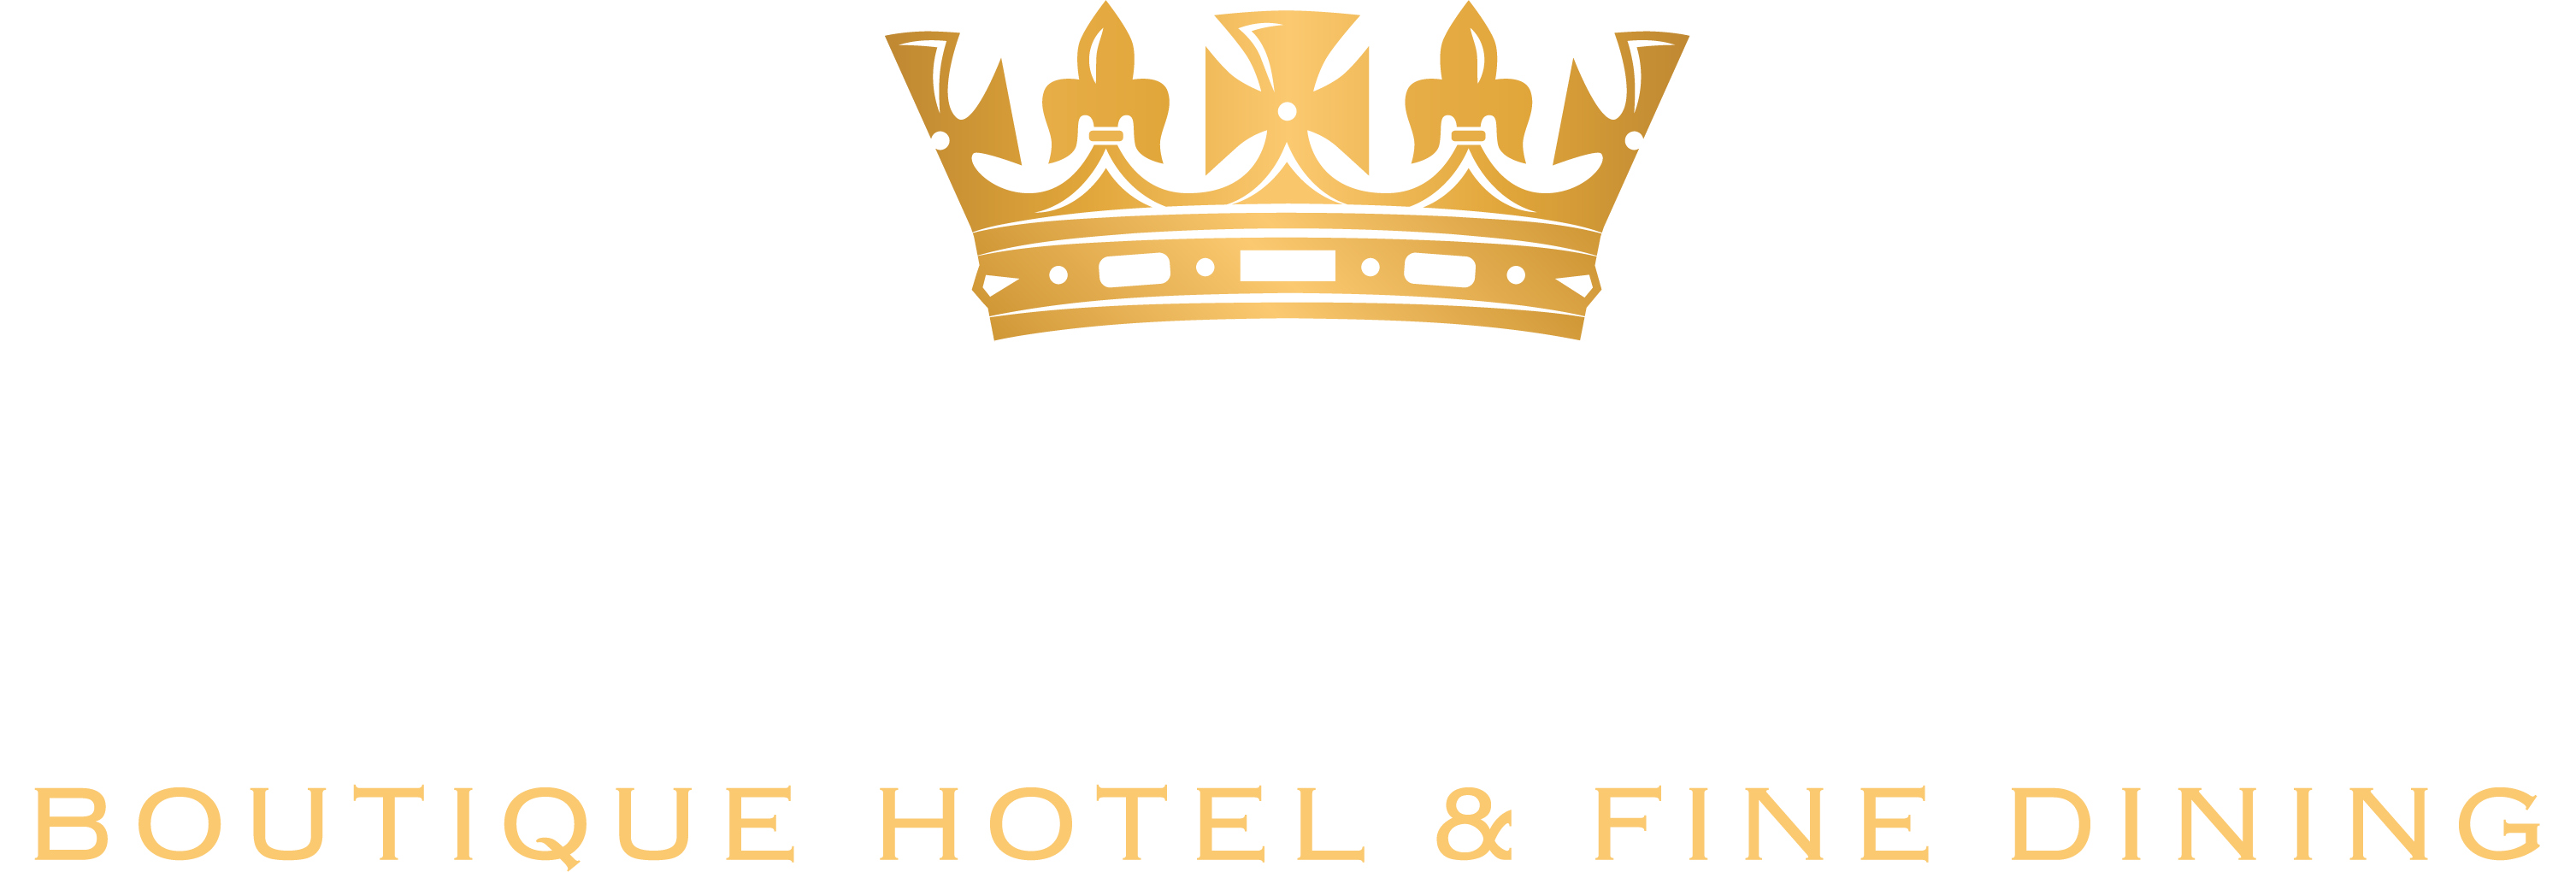 The Duke of Clarence